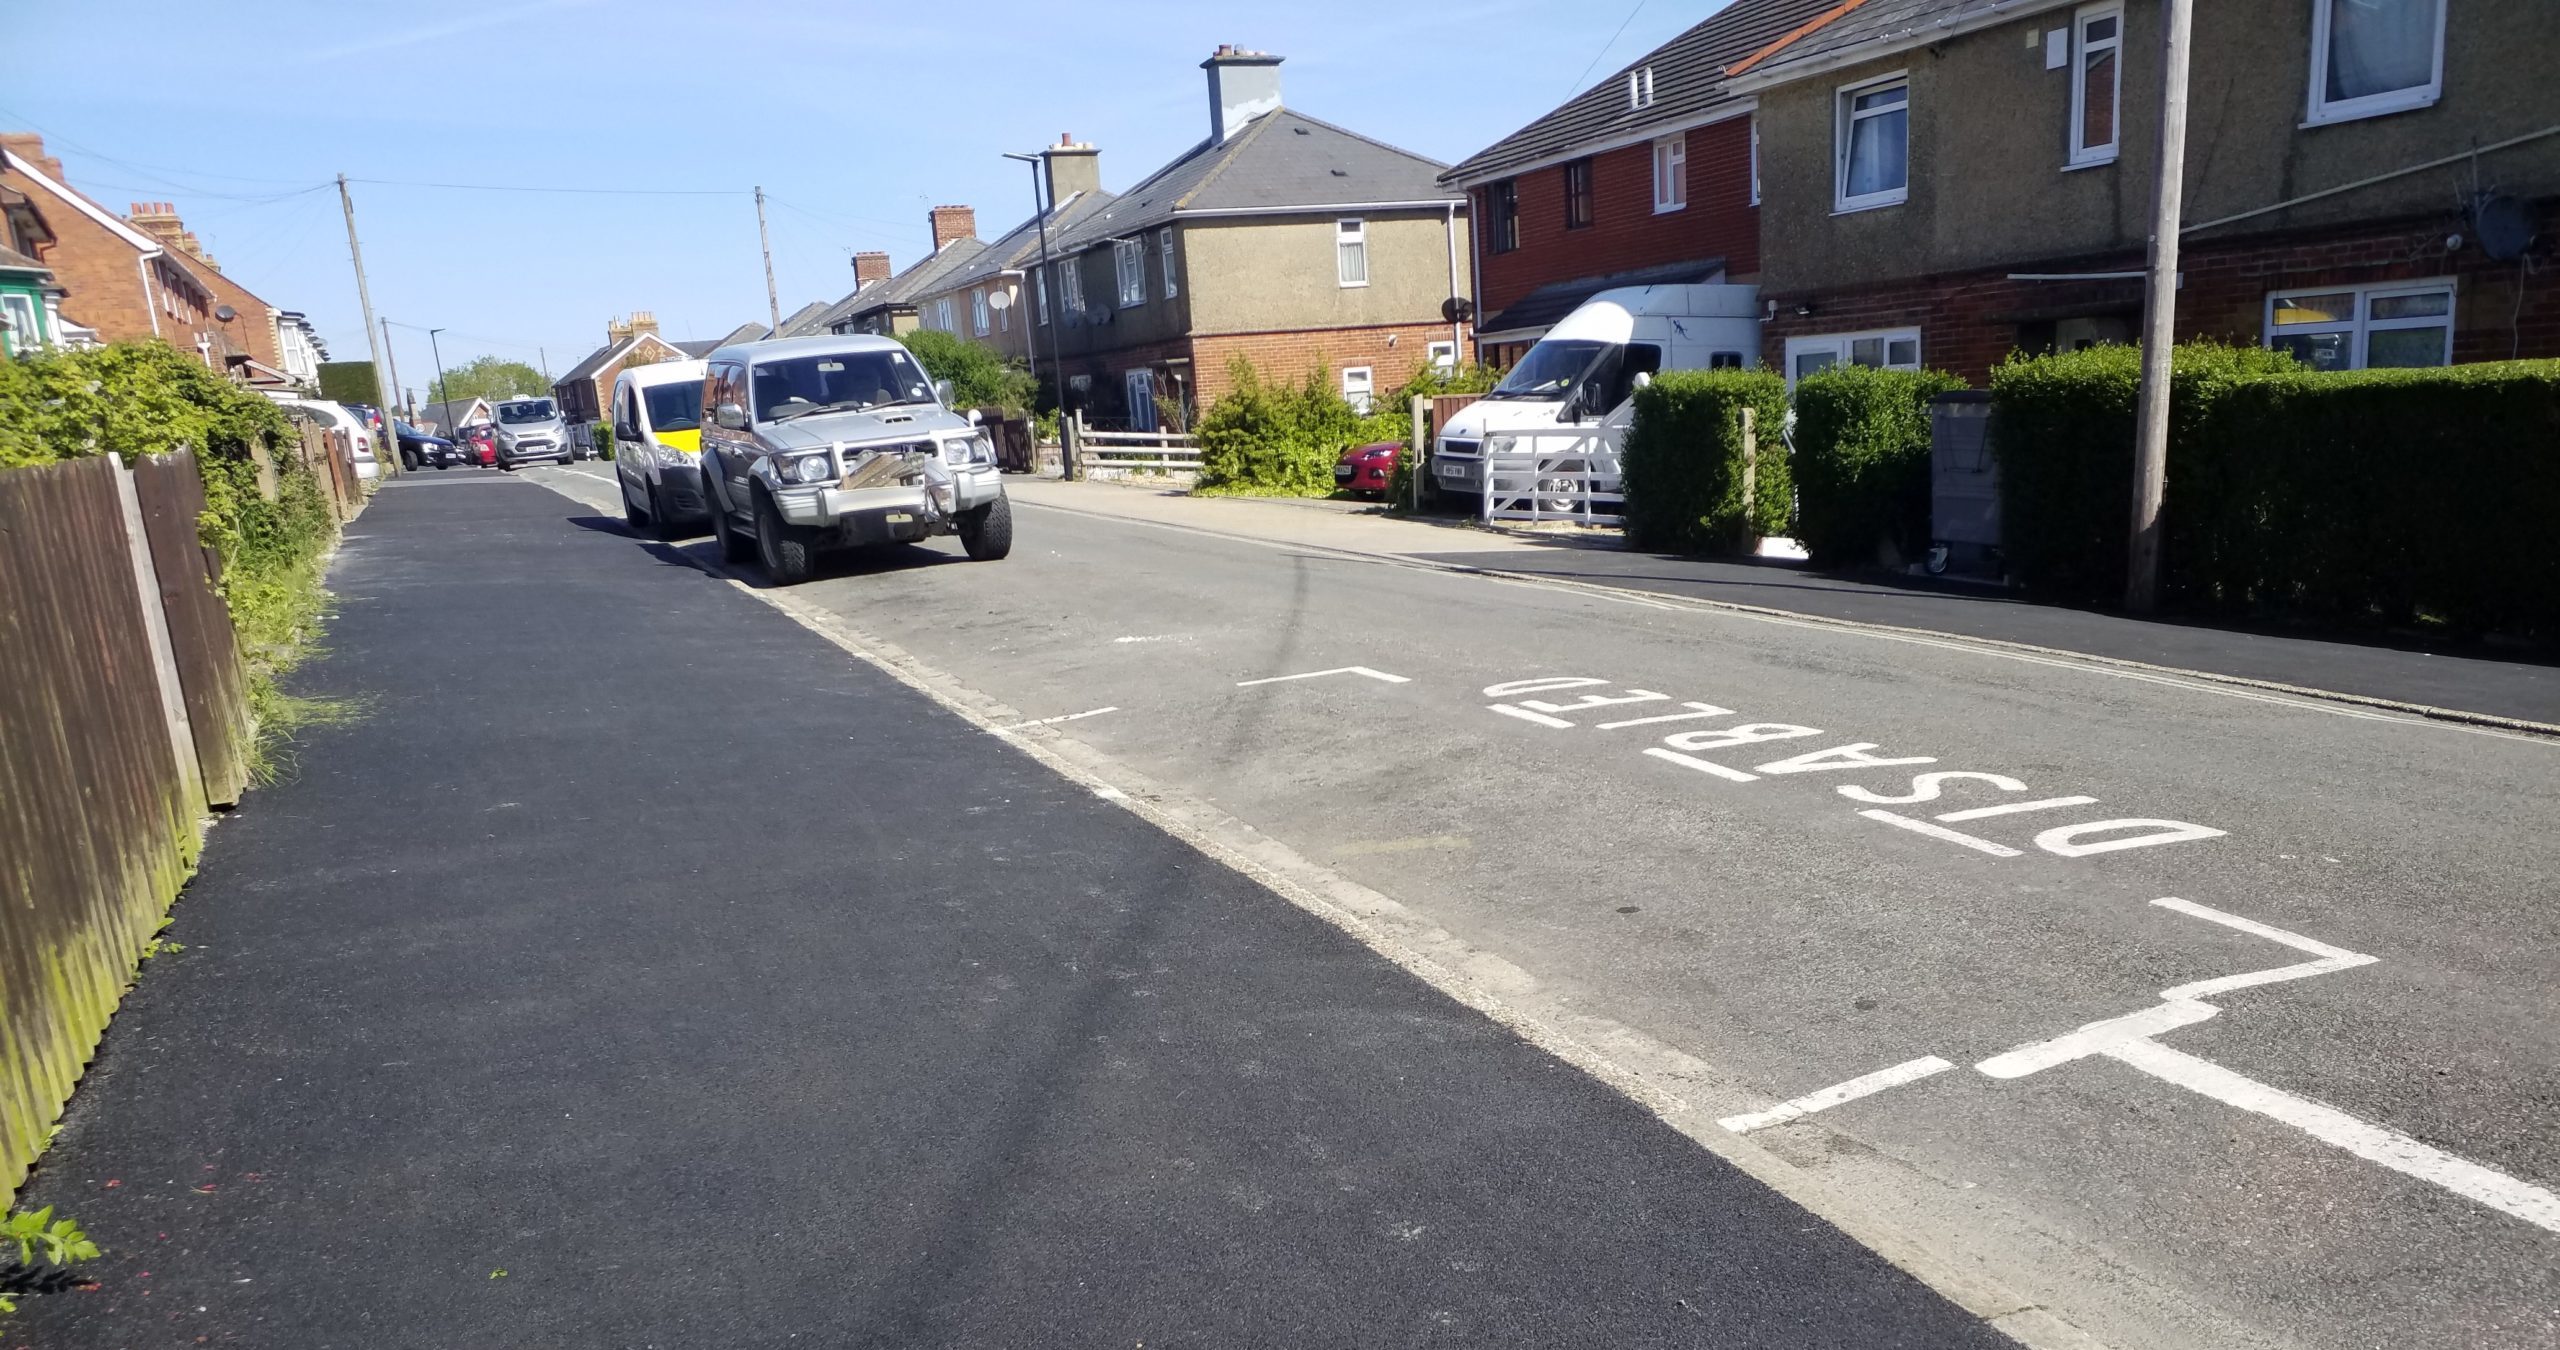 Photo showing disabled bay marked out on the road